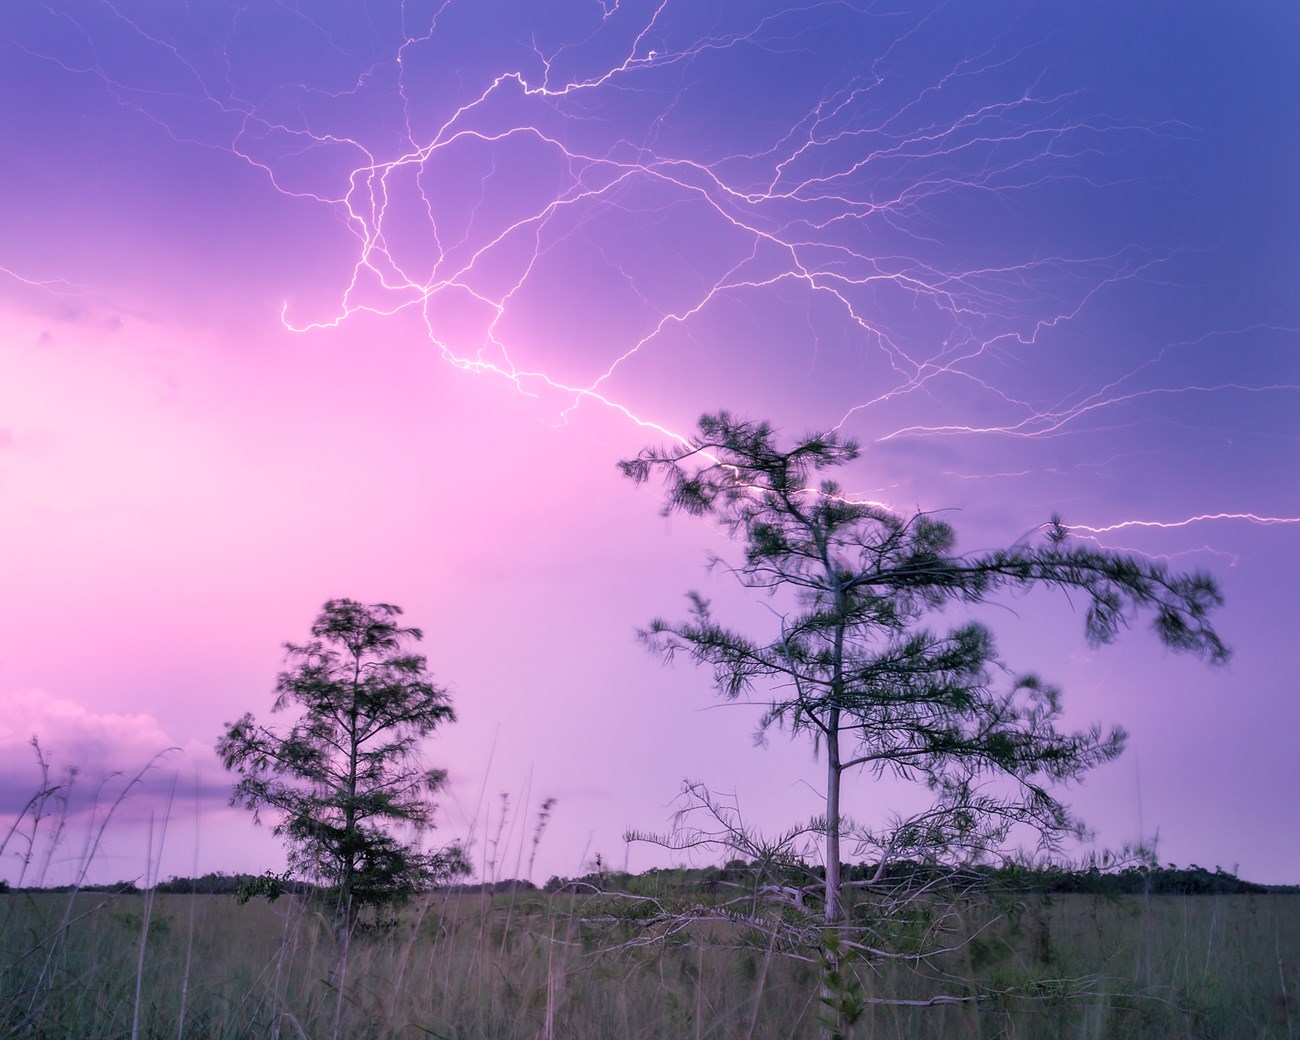 Lightning strikes in a purple sky above cypress trees.